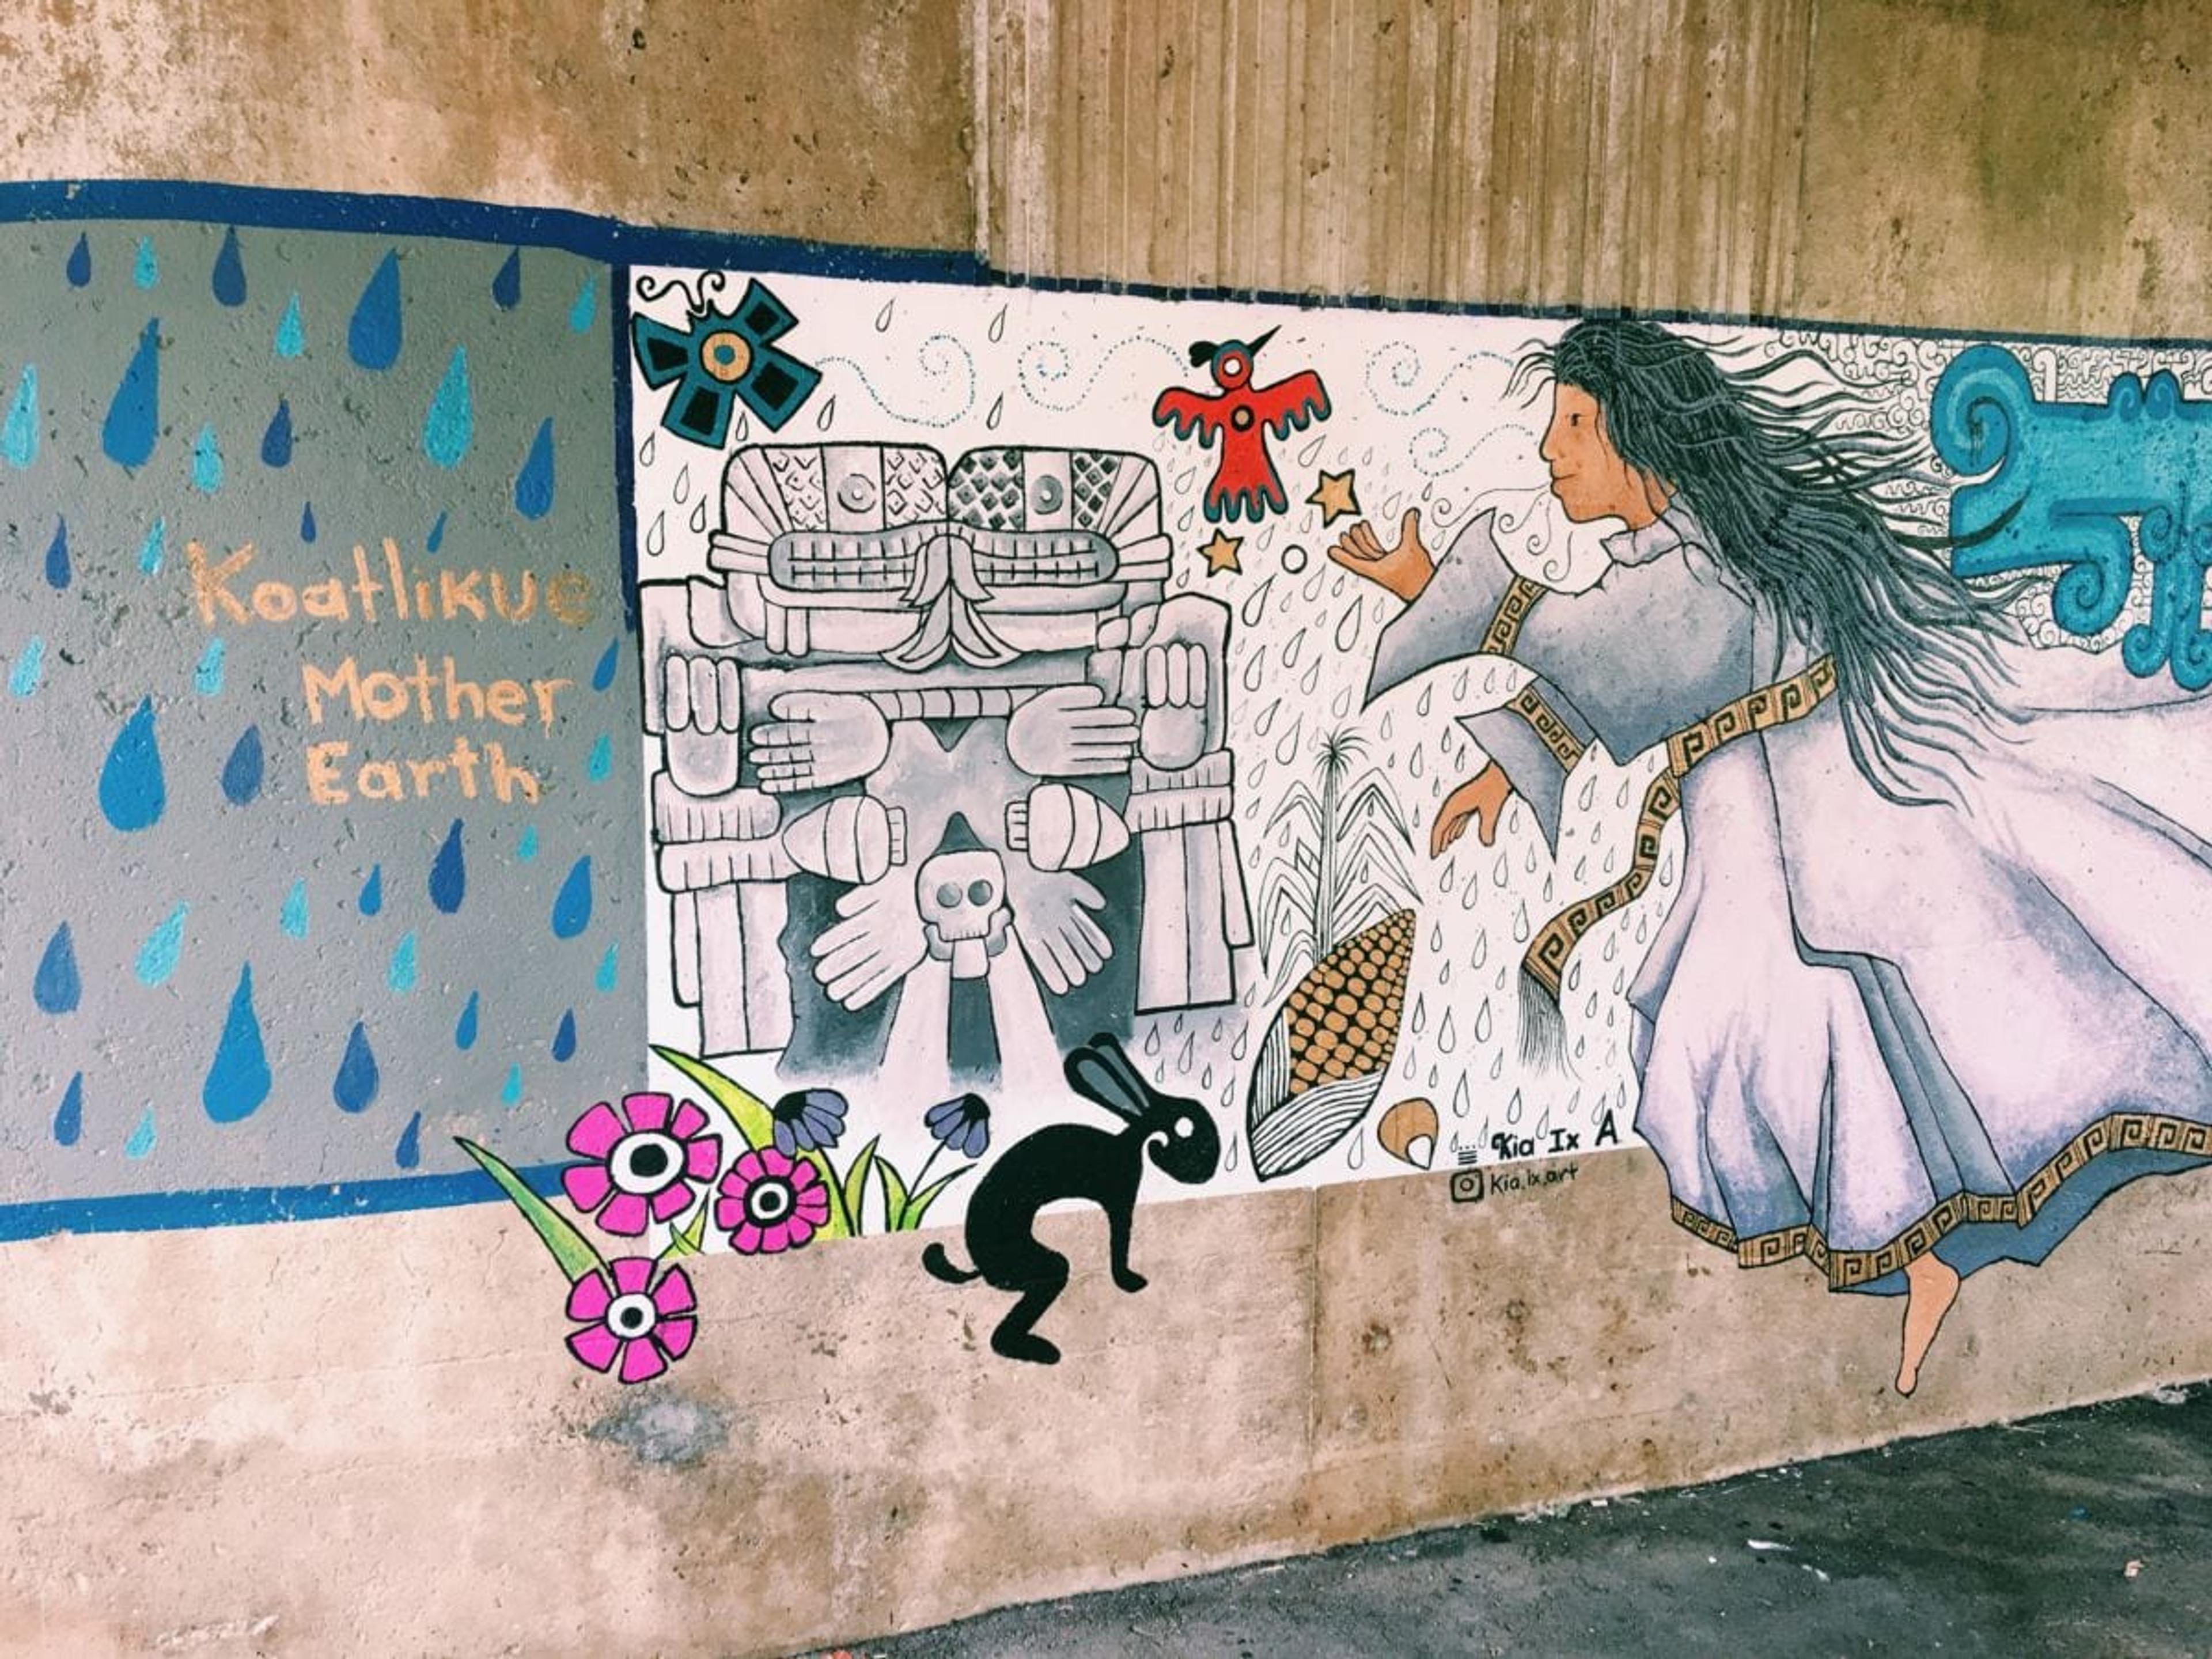 A mural featured on the ARTpath